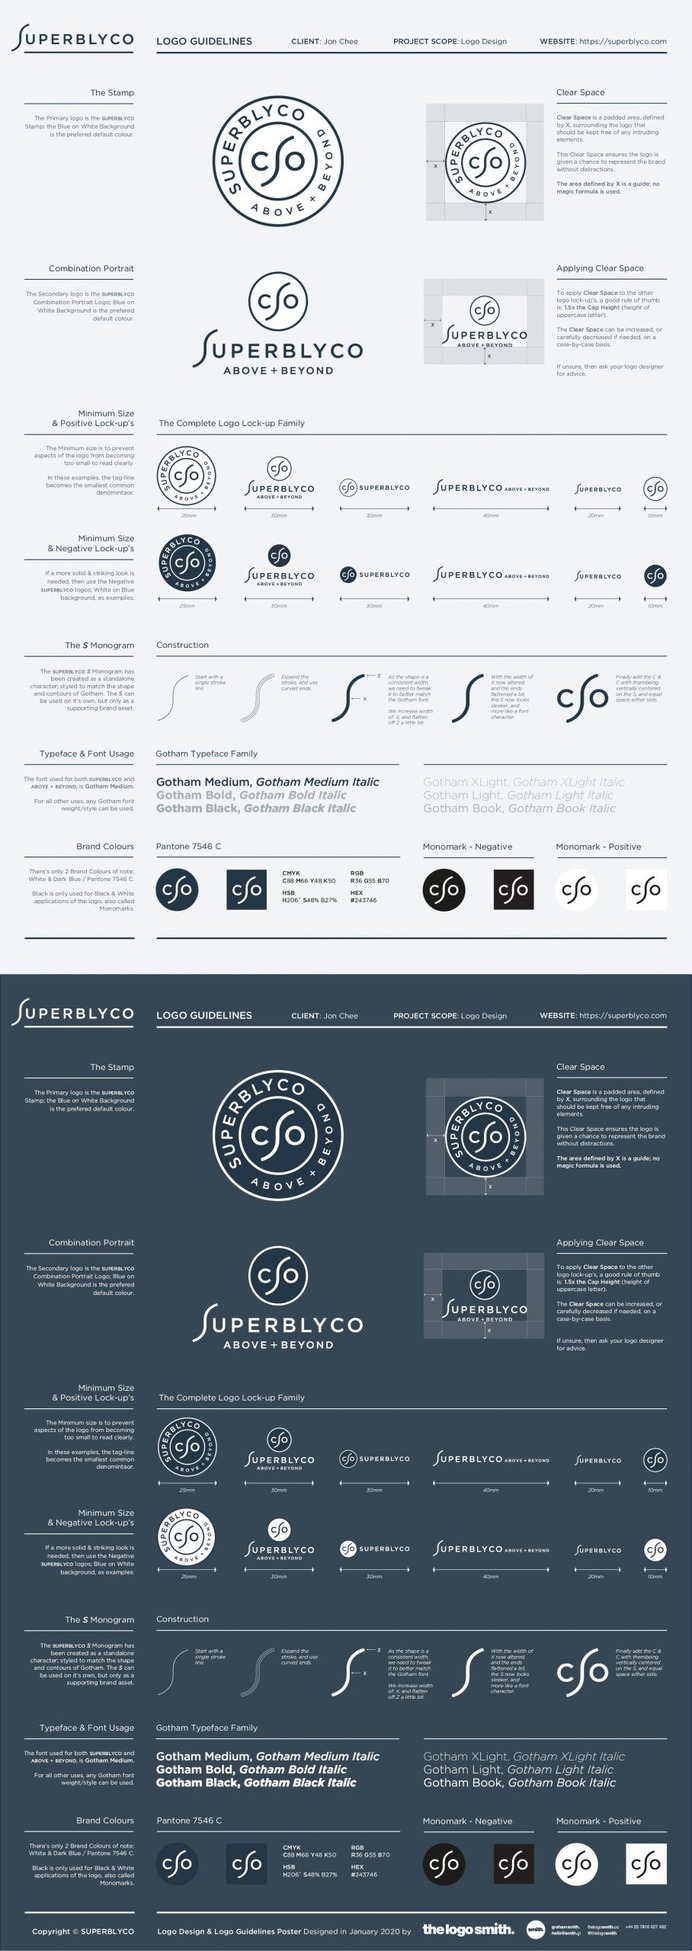 Logo Guidelines Poster - Illustrator Template for Free Download by The Logo Smith